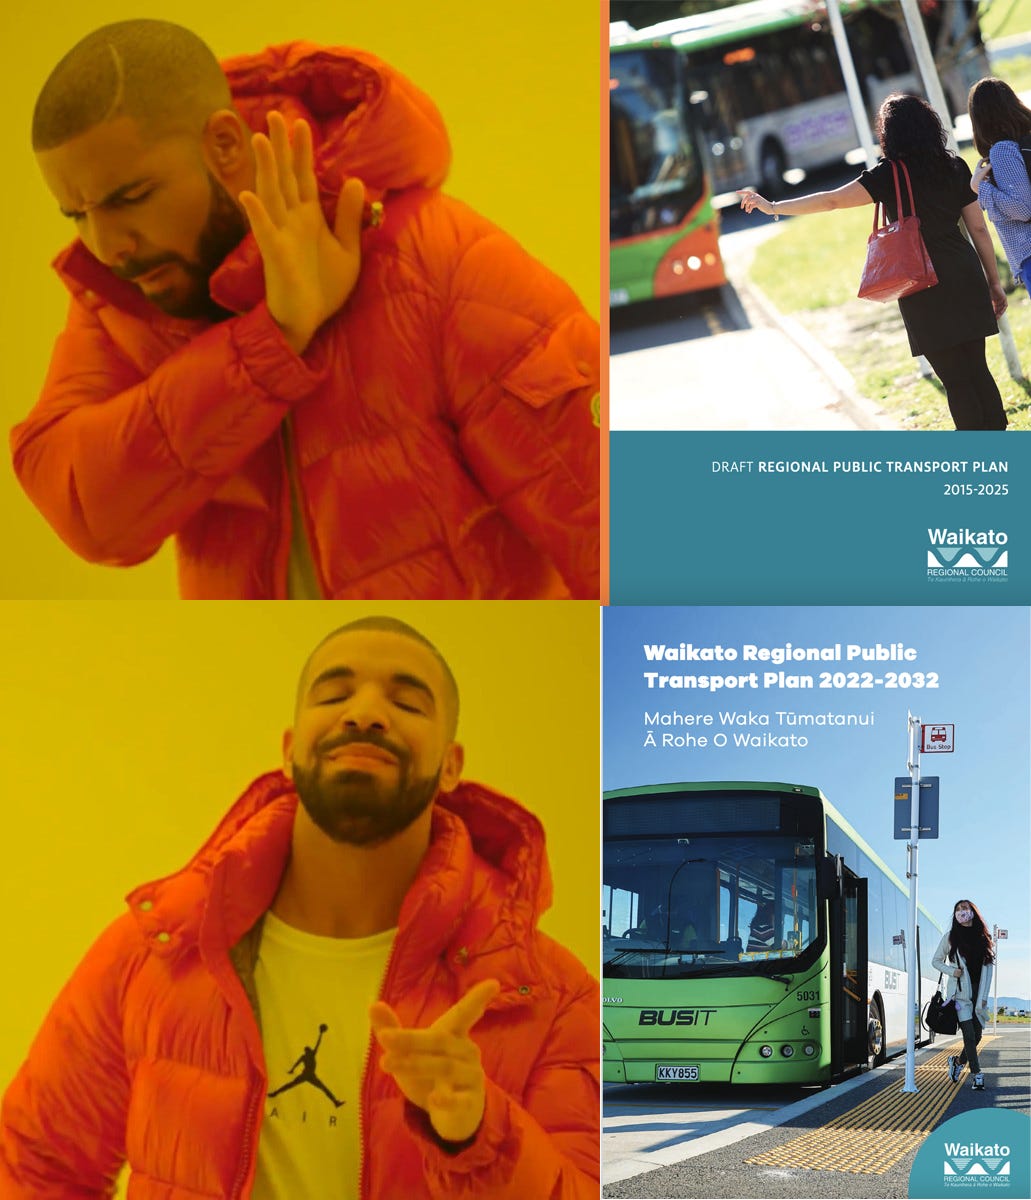 Drake hotline bling meme with a picture of the old Regional Public Transport Plan up the top with Drake in disgust, and the bottom is Drake showing affection to the updated Regional Public Transport Plan 2022-2032